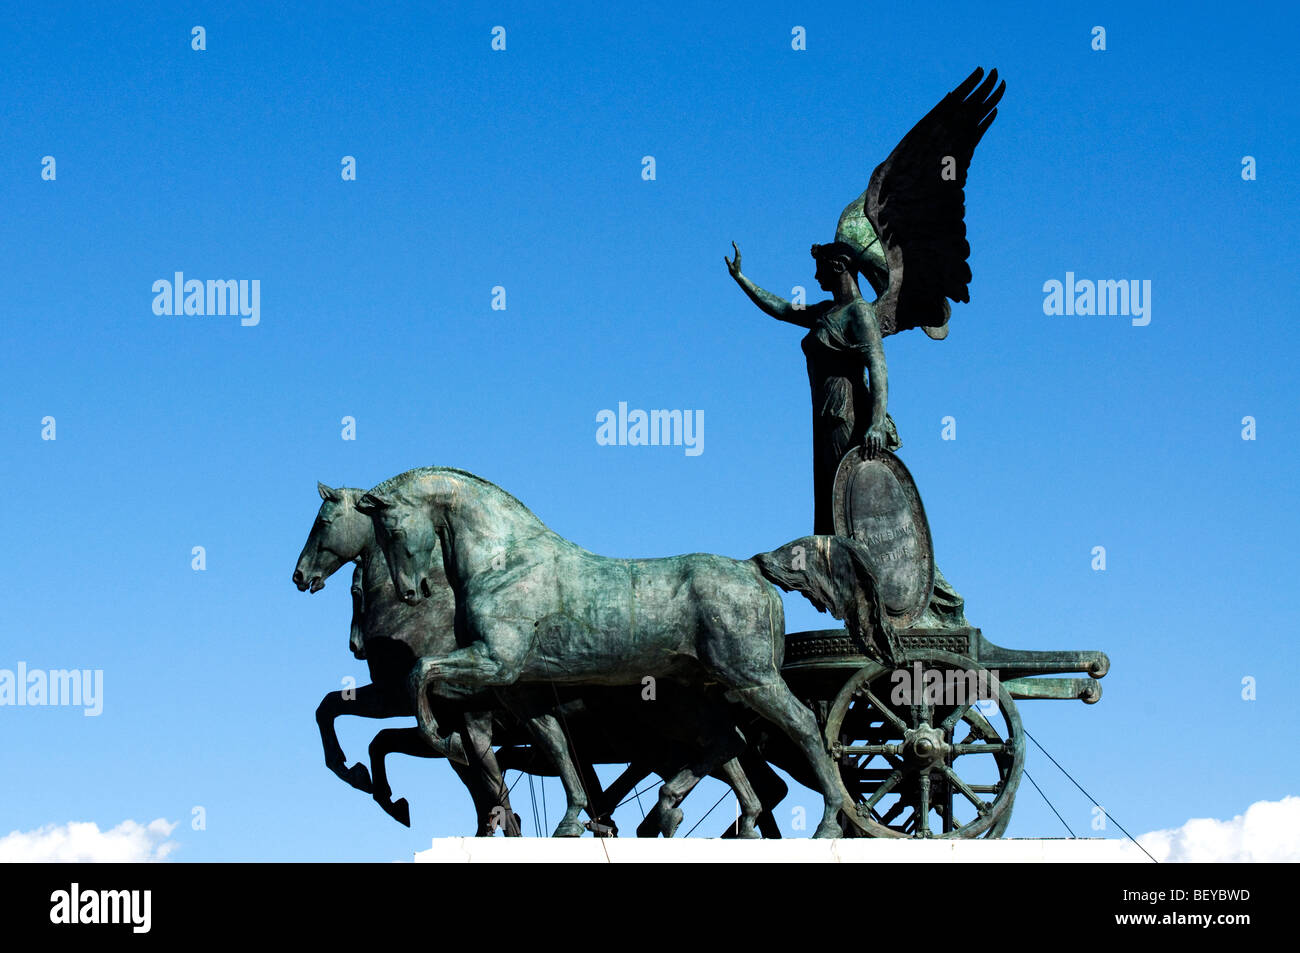 Statue of the goddess Victoria riding on quadriga on the top of the Monument to Vittorio Emanuele II, Rome, Italy Stock Photo